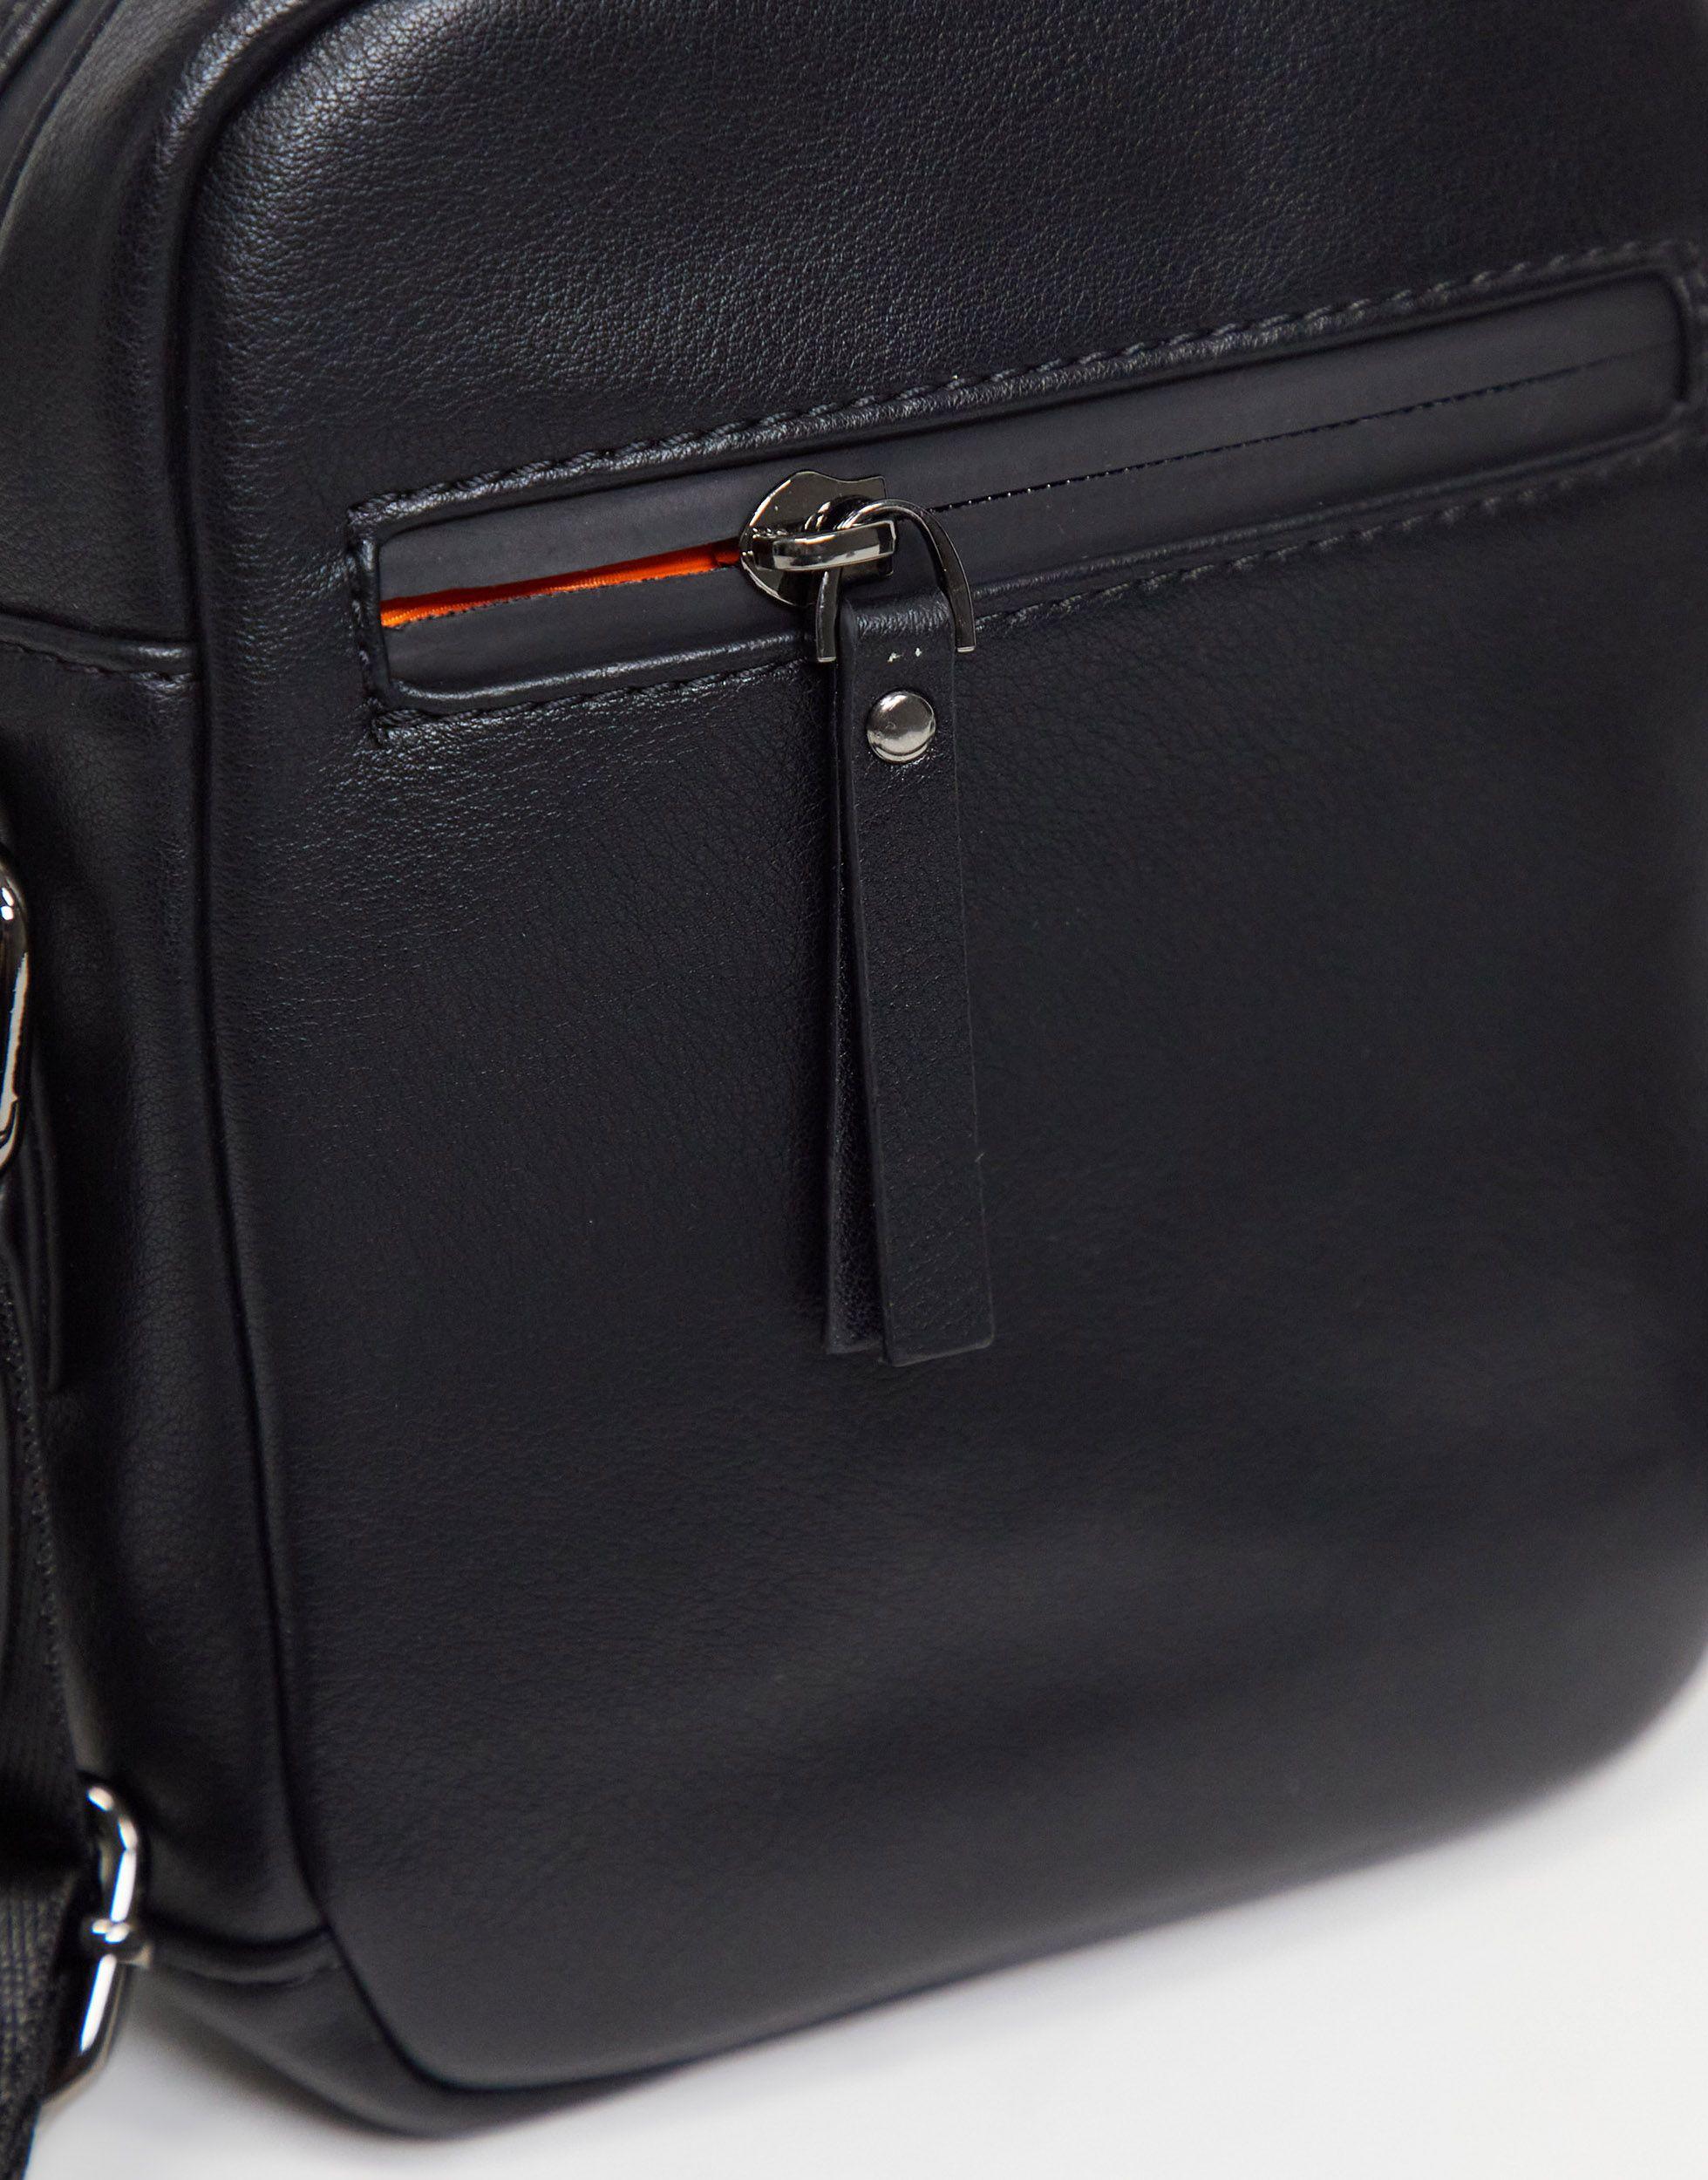 Perfect bag for work by Smith and Canova #mens #style #fashion